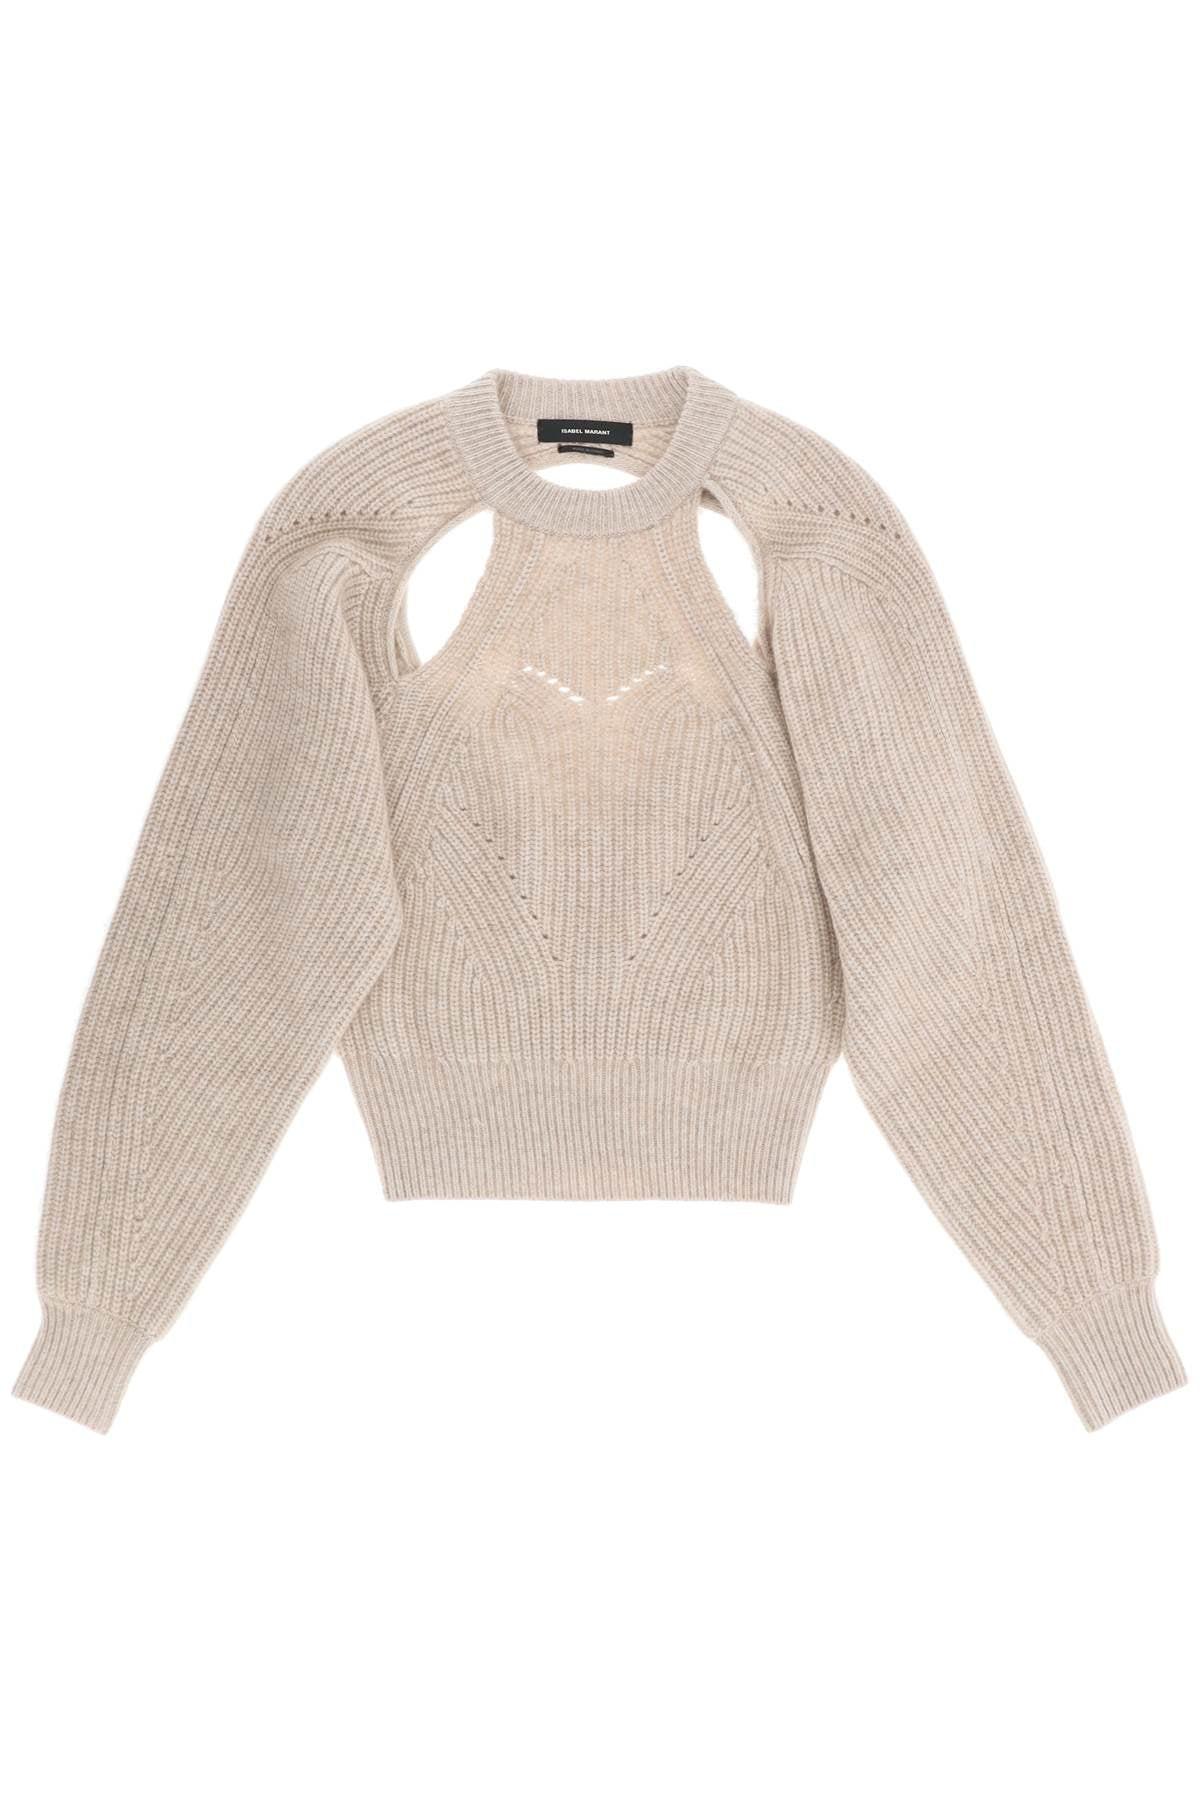 Isabel Marant 'palma' Wool And Cashmere Sweater With Cut Outs in ...